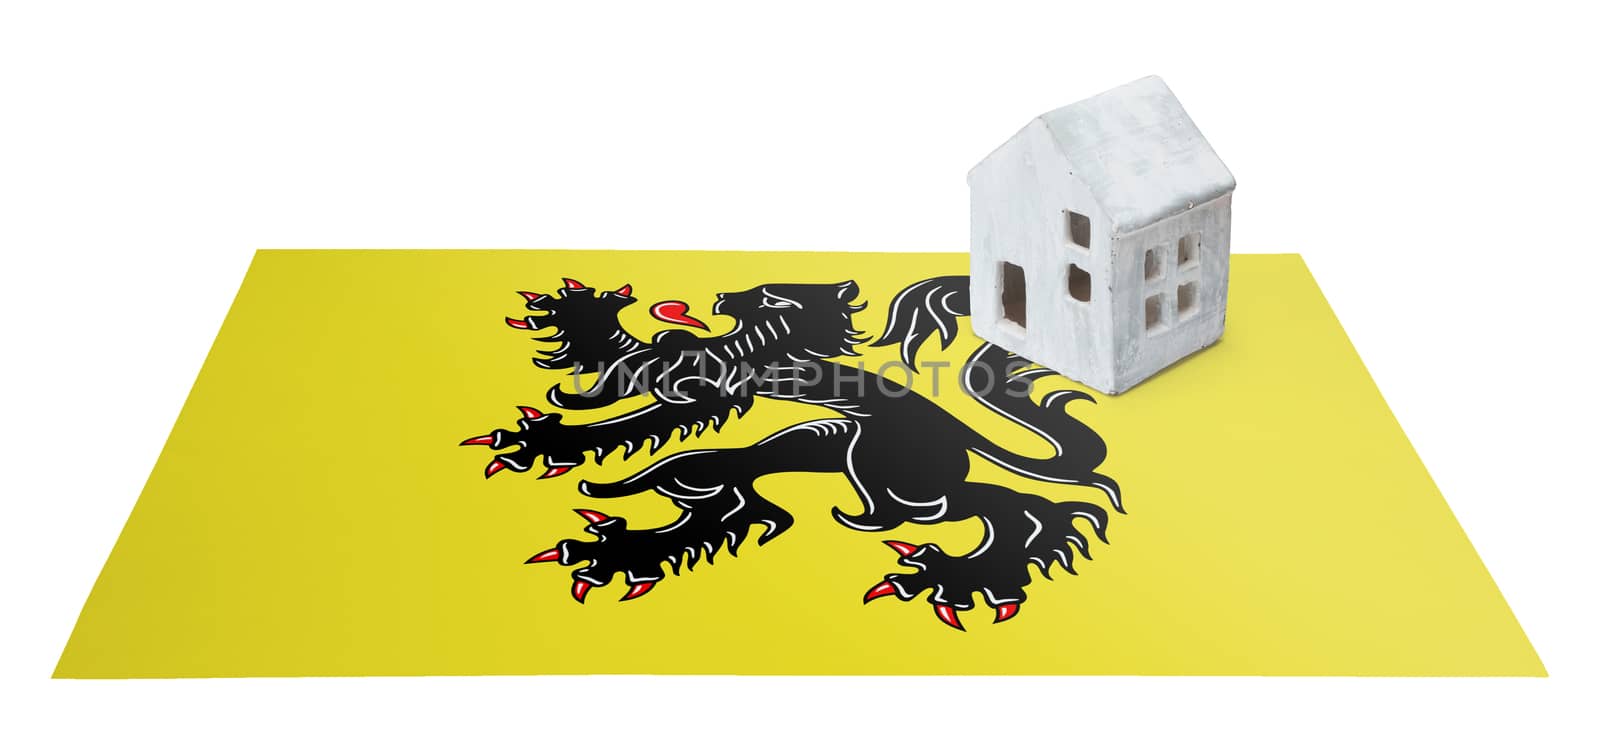 Small house on a flag - Flanders by michaklootwijk